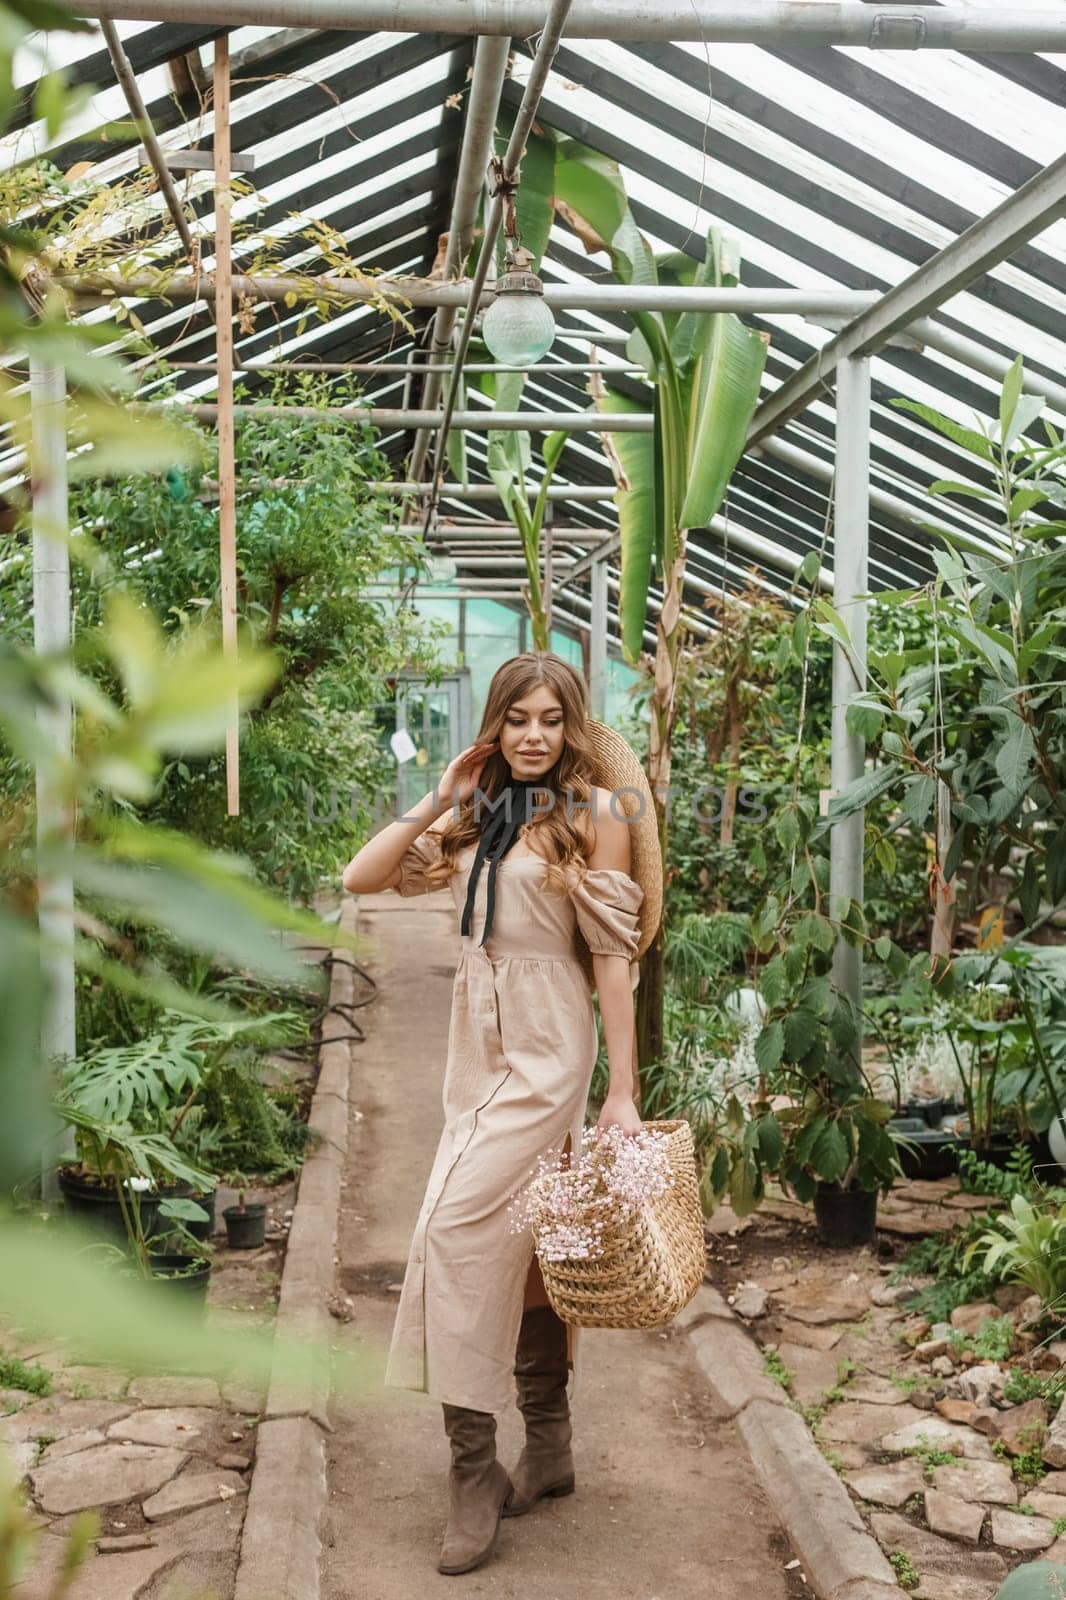 A beautiful young woman takes care of plants in a greenhouse. The concept of gardening and an eco-friendly lifestyle